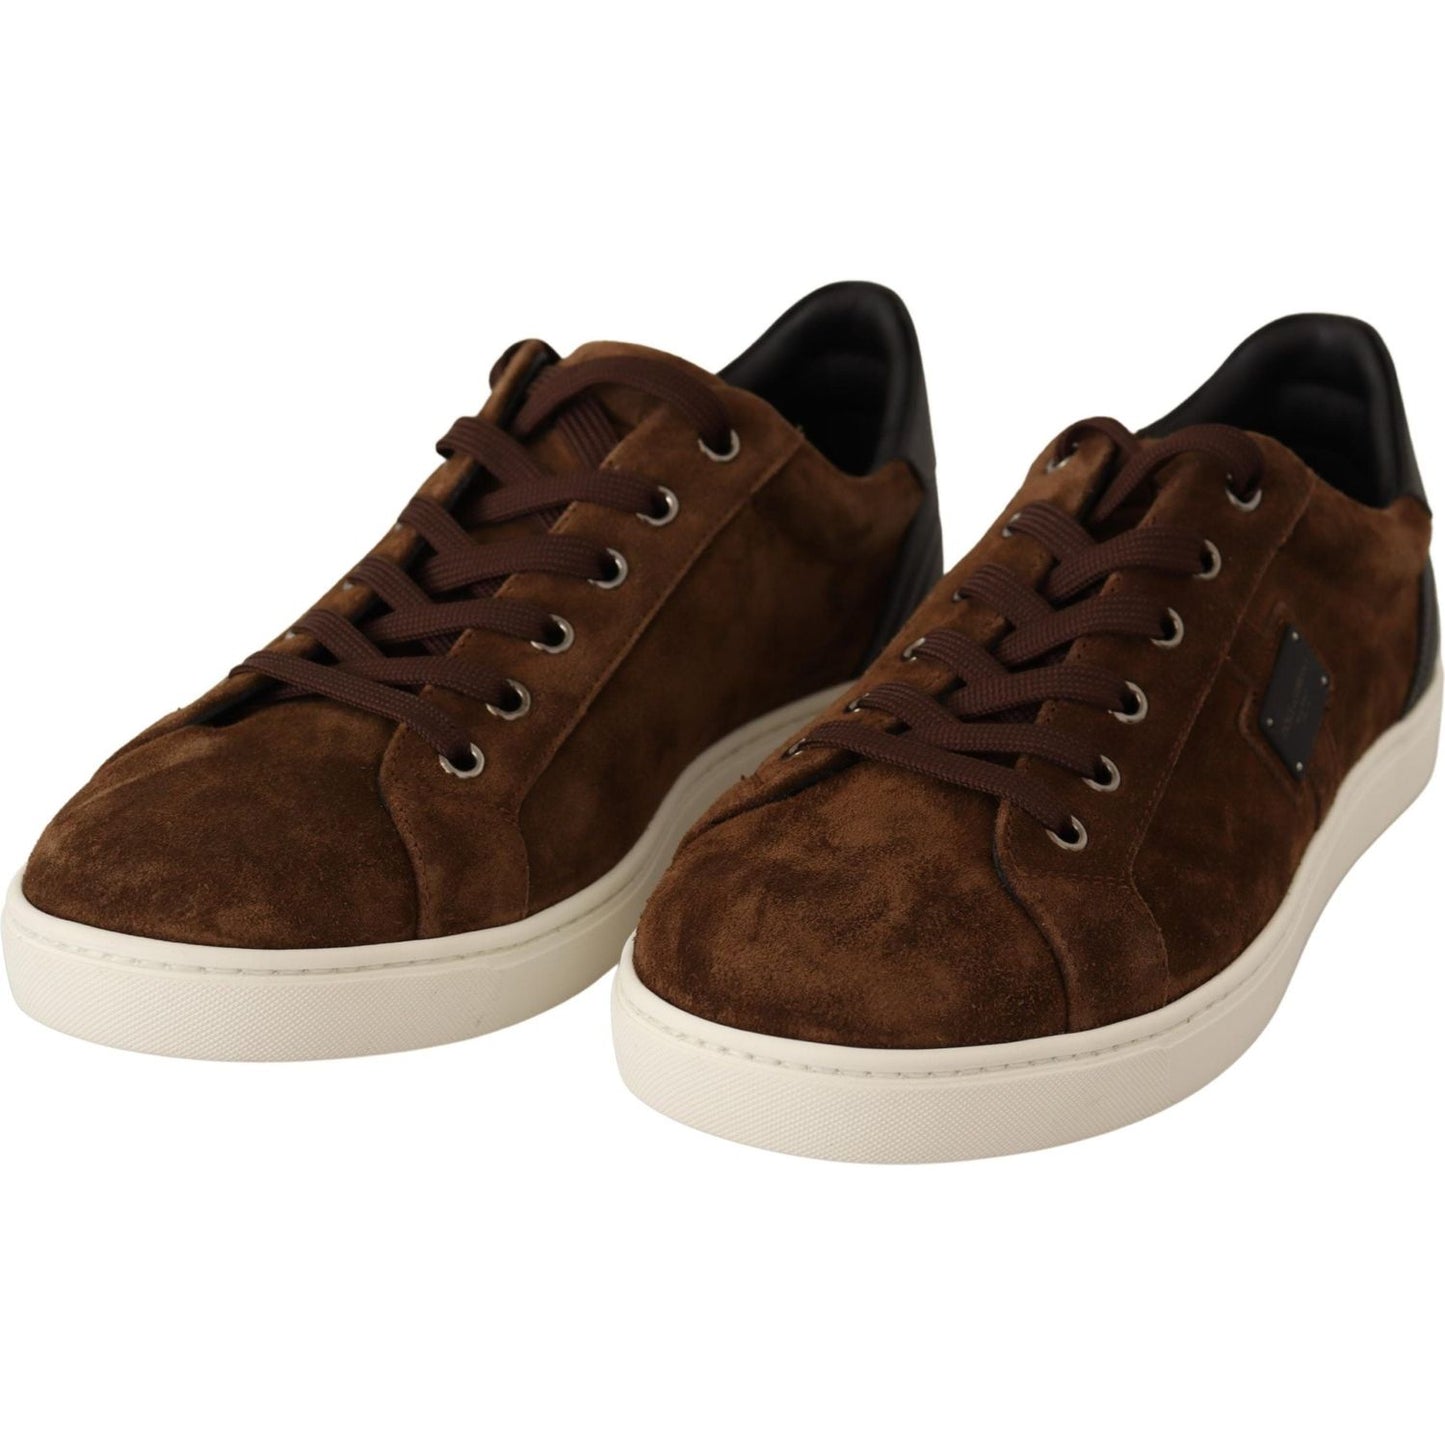 Dolce & Gabbana Elegant Leather Casual Sneakers in Brown brown-suede-leather-mens-low-tops-sneakers IMG_4820-scaled-9a5474bd-636.jpg